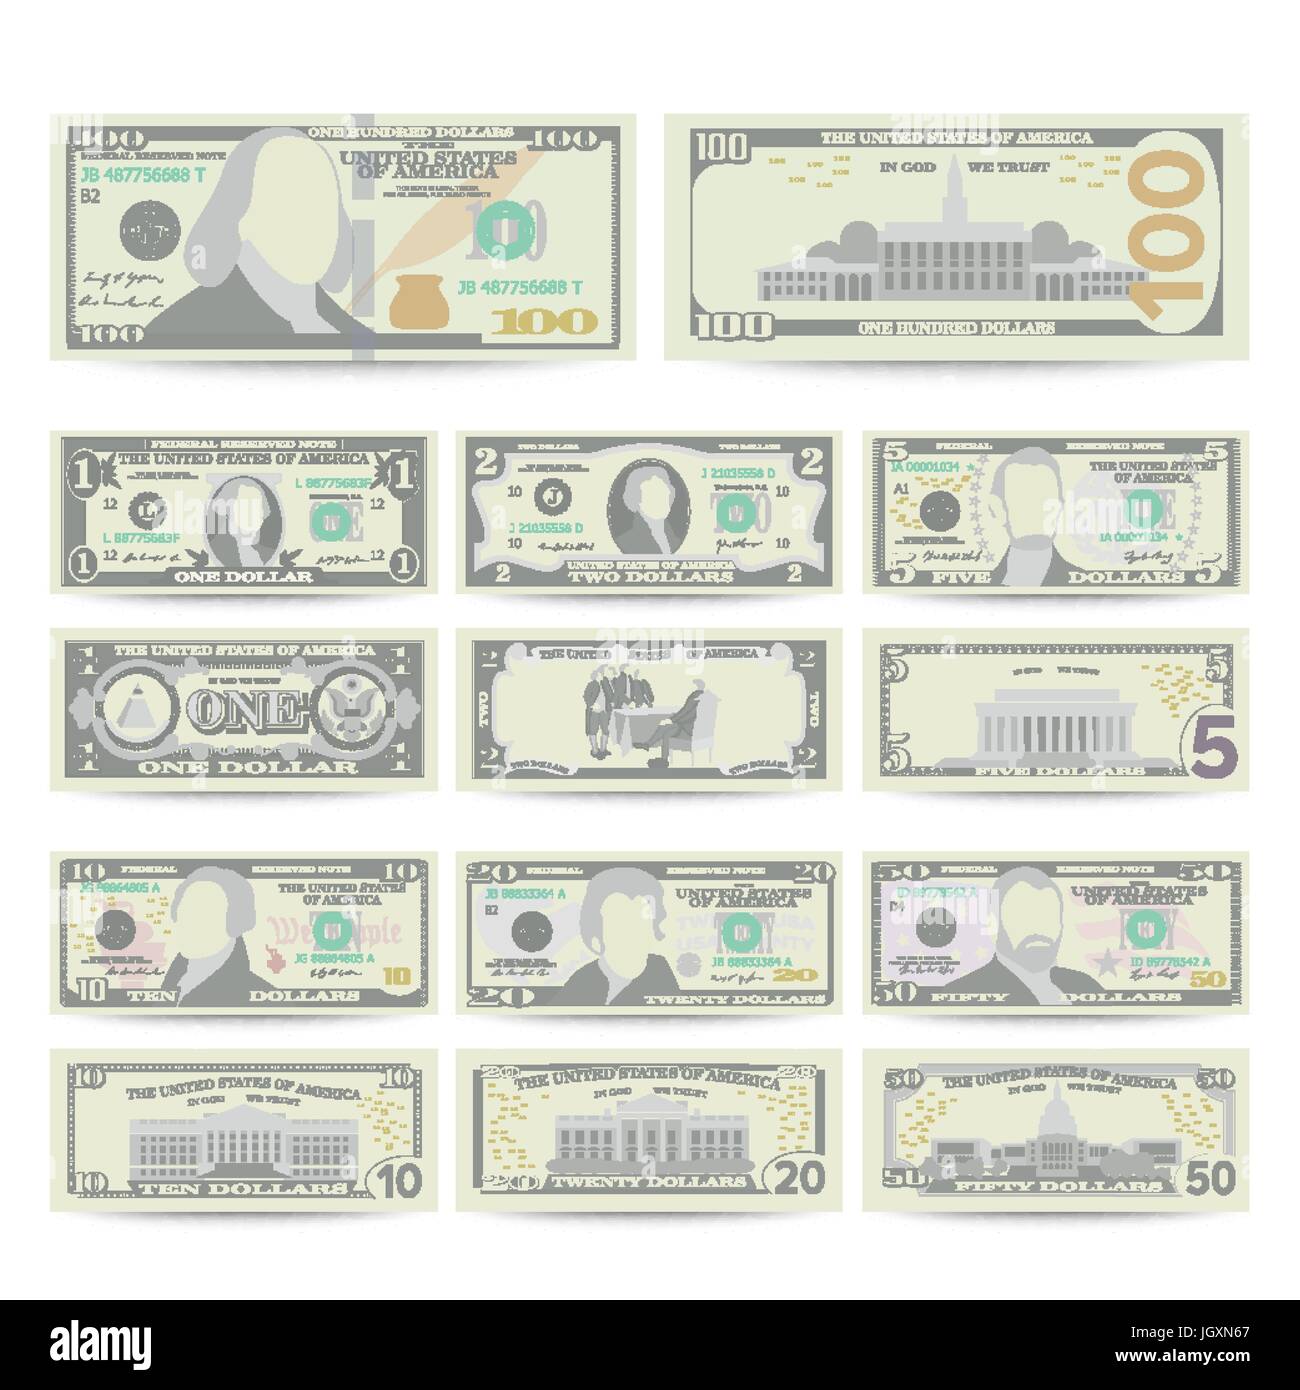 Dollars Banknote Set Vector. Cartoon US Currency. Two Sides Of American Money Bill Isolated Illustration. Cash Dollar Symbol. Every Denomination Of US Currency Note. Stock Vector